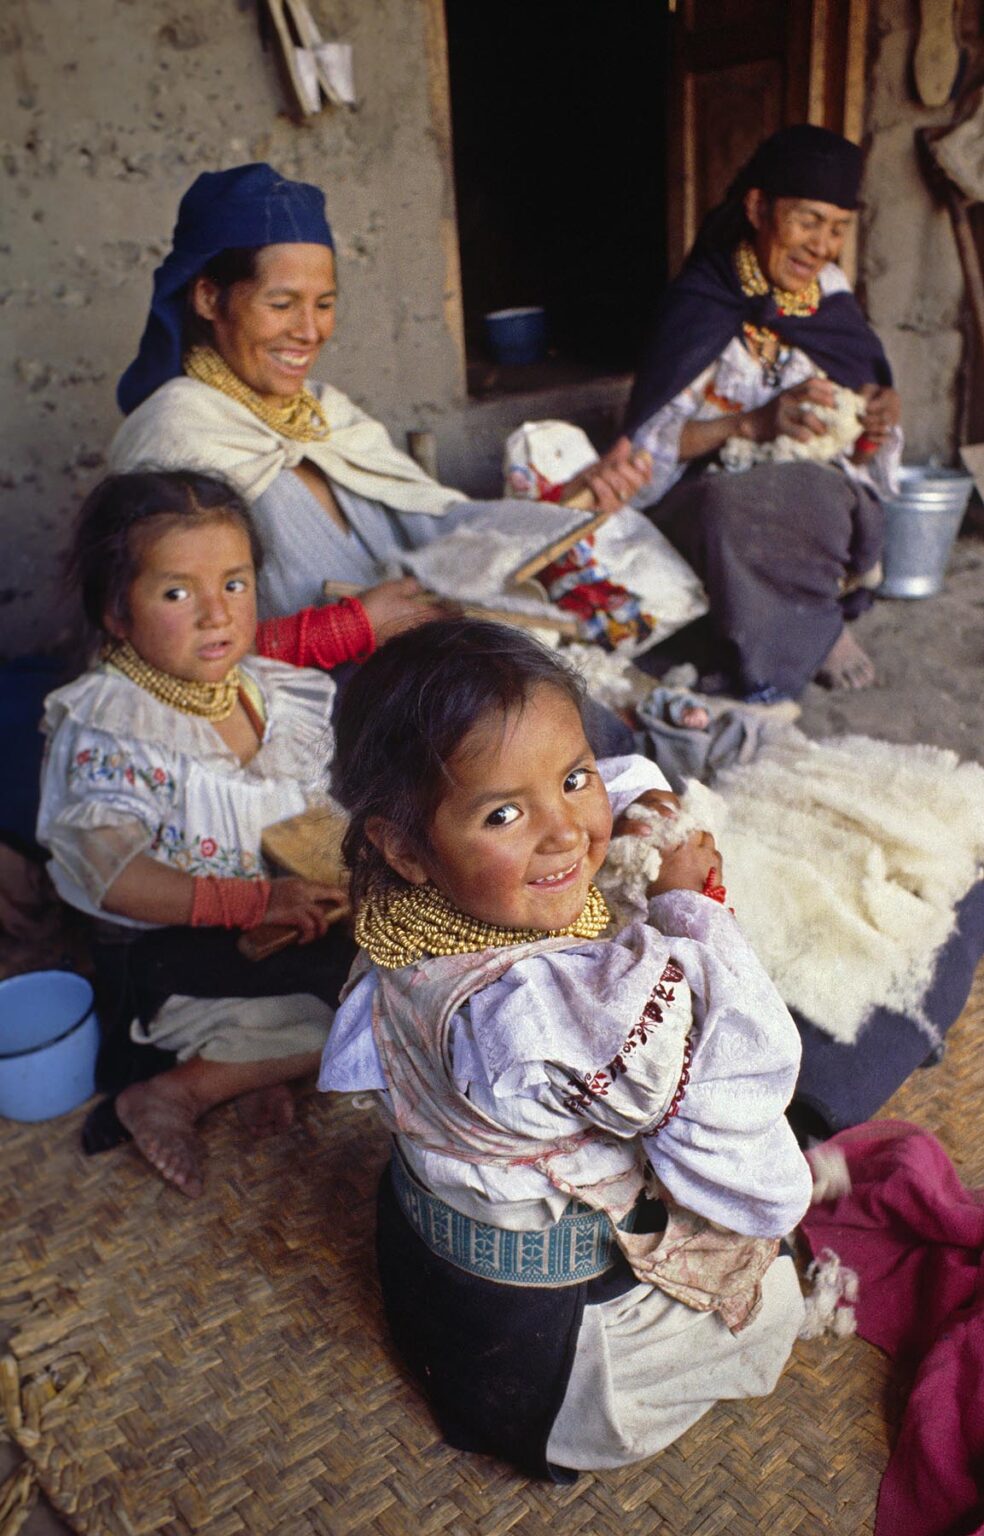 OTAVALO INDIAN WOMAN with FAMILY CARDING WOOL in the MARKETPLACE - OTAVALO, ECUADOR